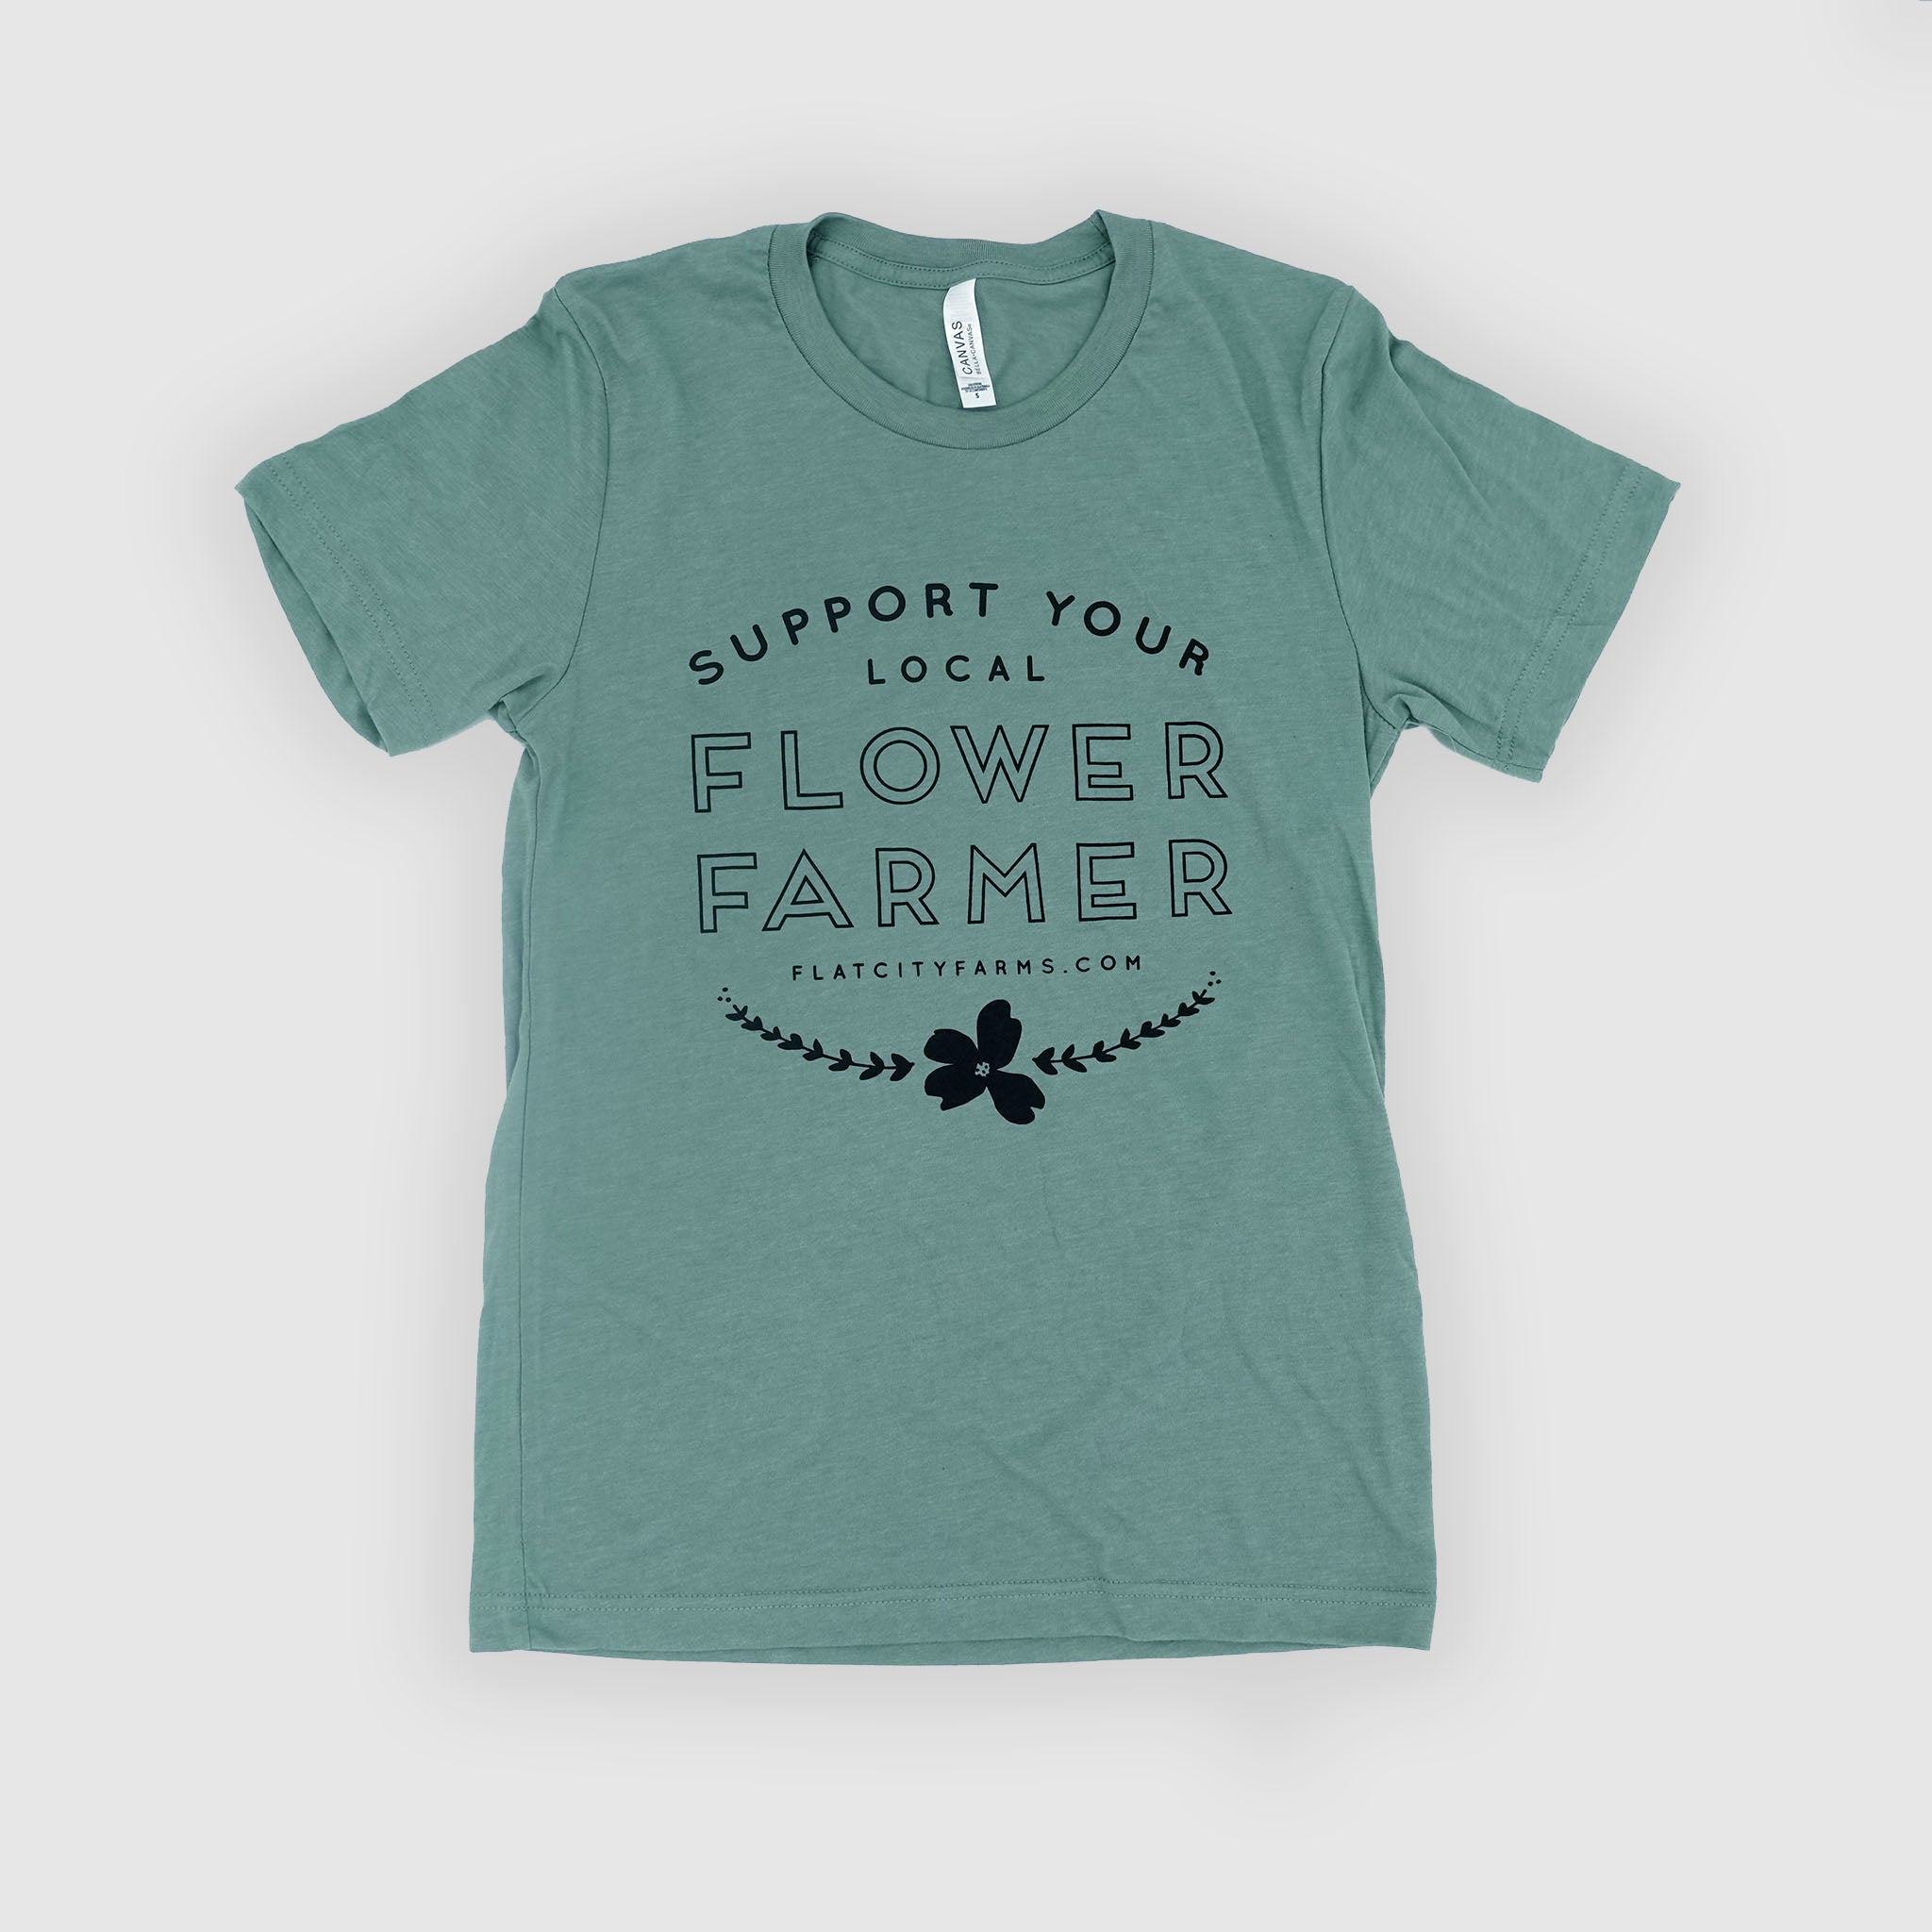 "Support Your Local Flower Farmer" T-Shirt